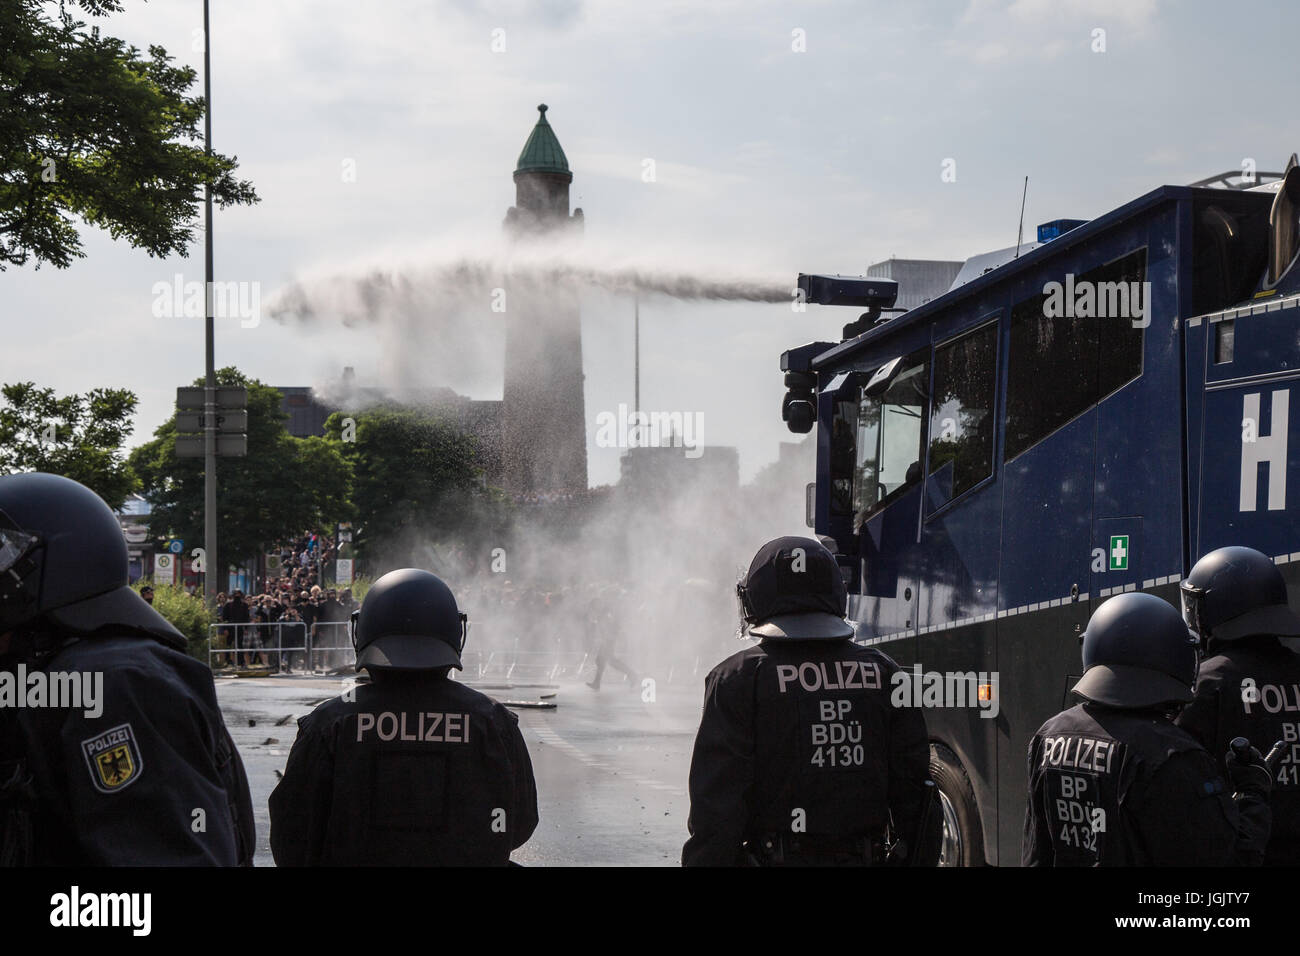 Hamburg, Germany. 7th July, 2017. Protesters and police clash in Hamburg, Germany, on the first day of the G20 Summit. Credit: Ted Hammond/Alamy Live News Stock Photo